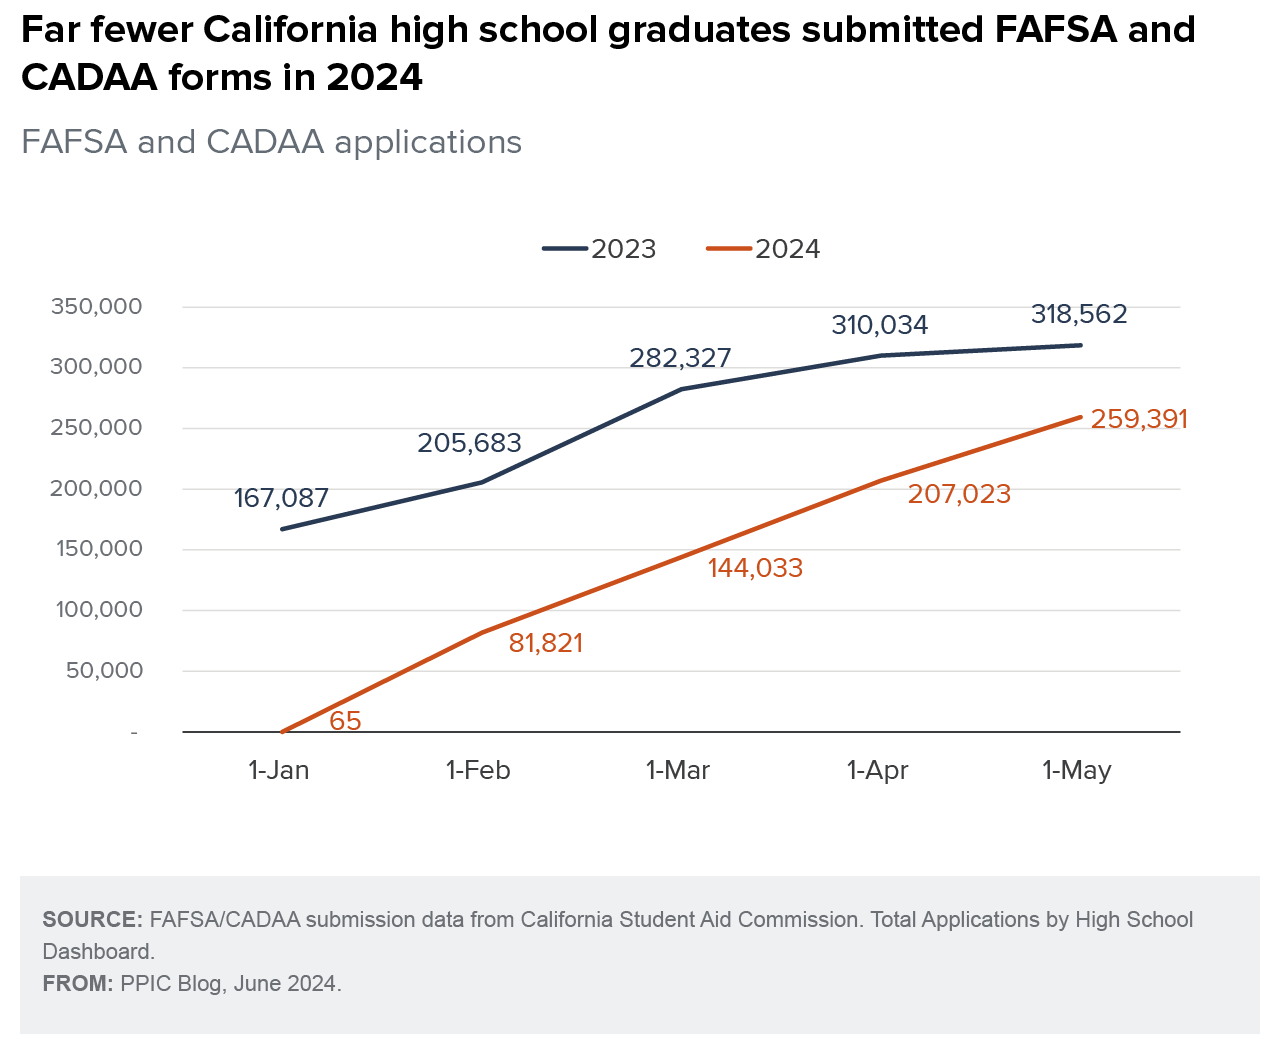 figure - Far fewer California high school graduates submitted FAFSA and CADAA forms in 2024